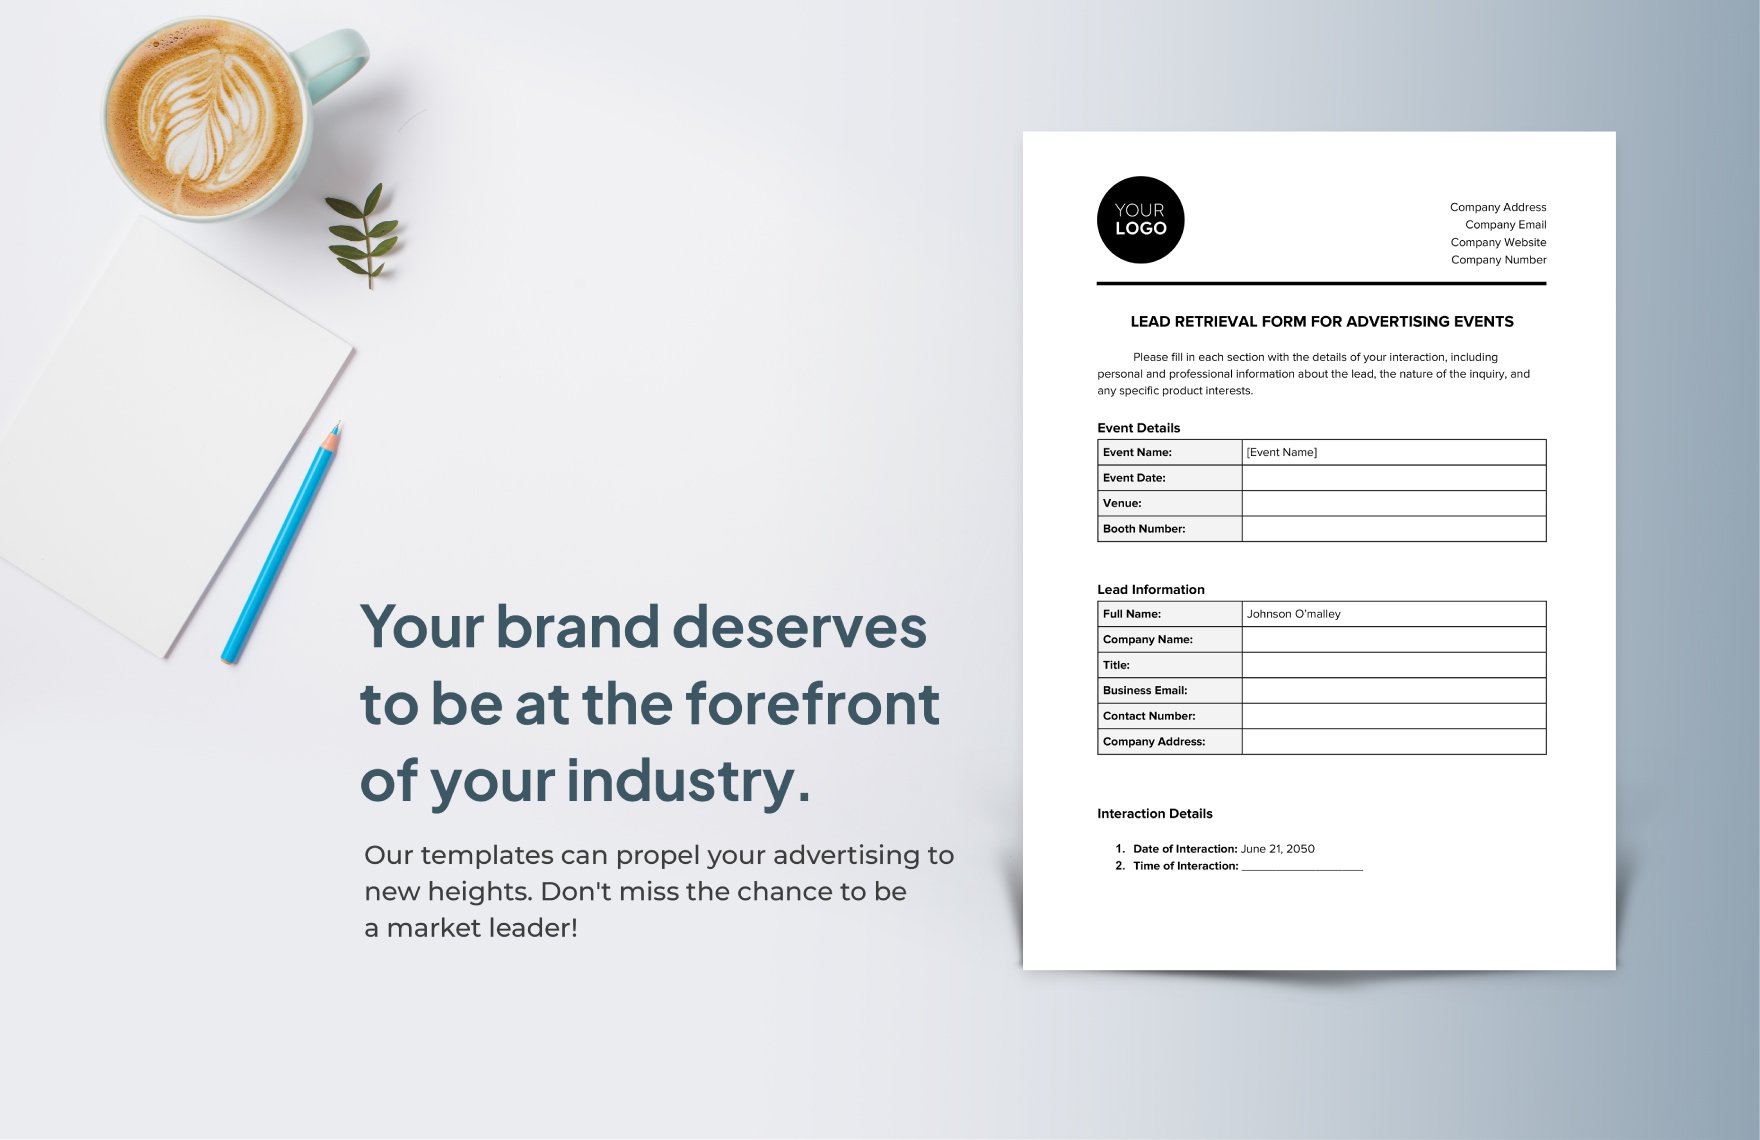 Lead Retrieval Form for Advertising Events Template